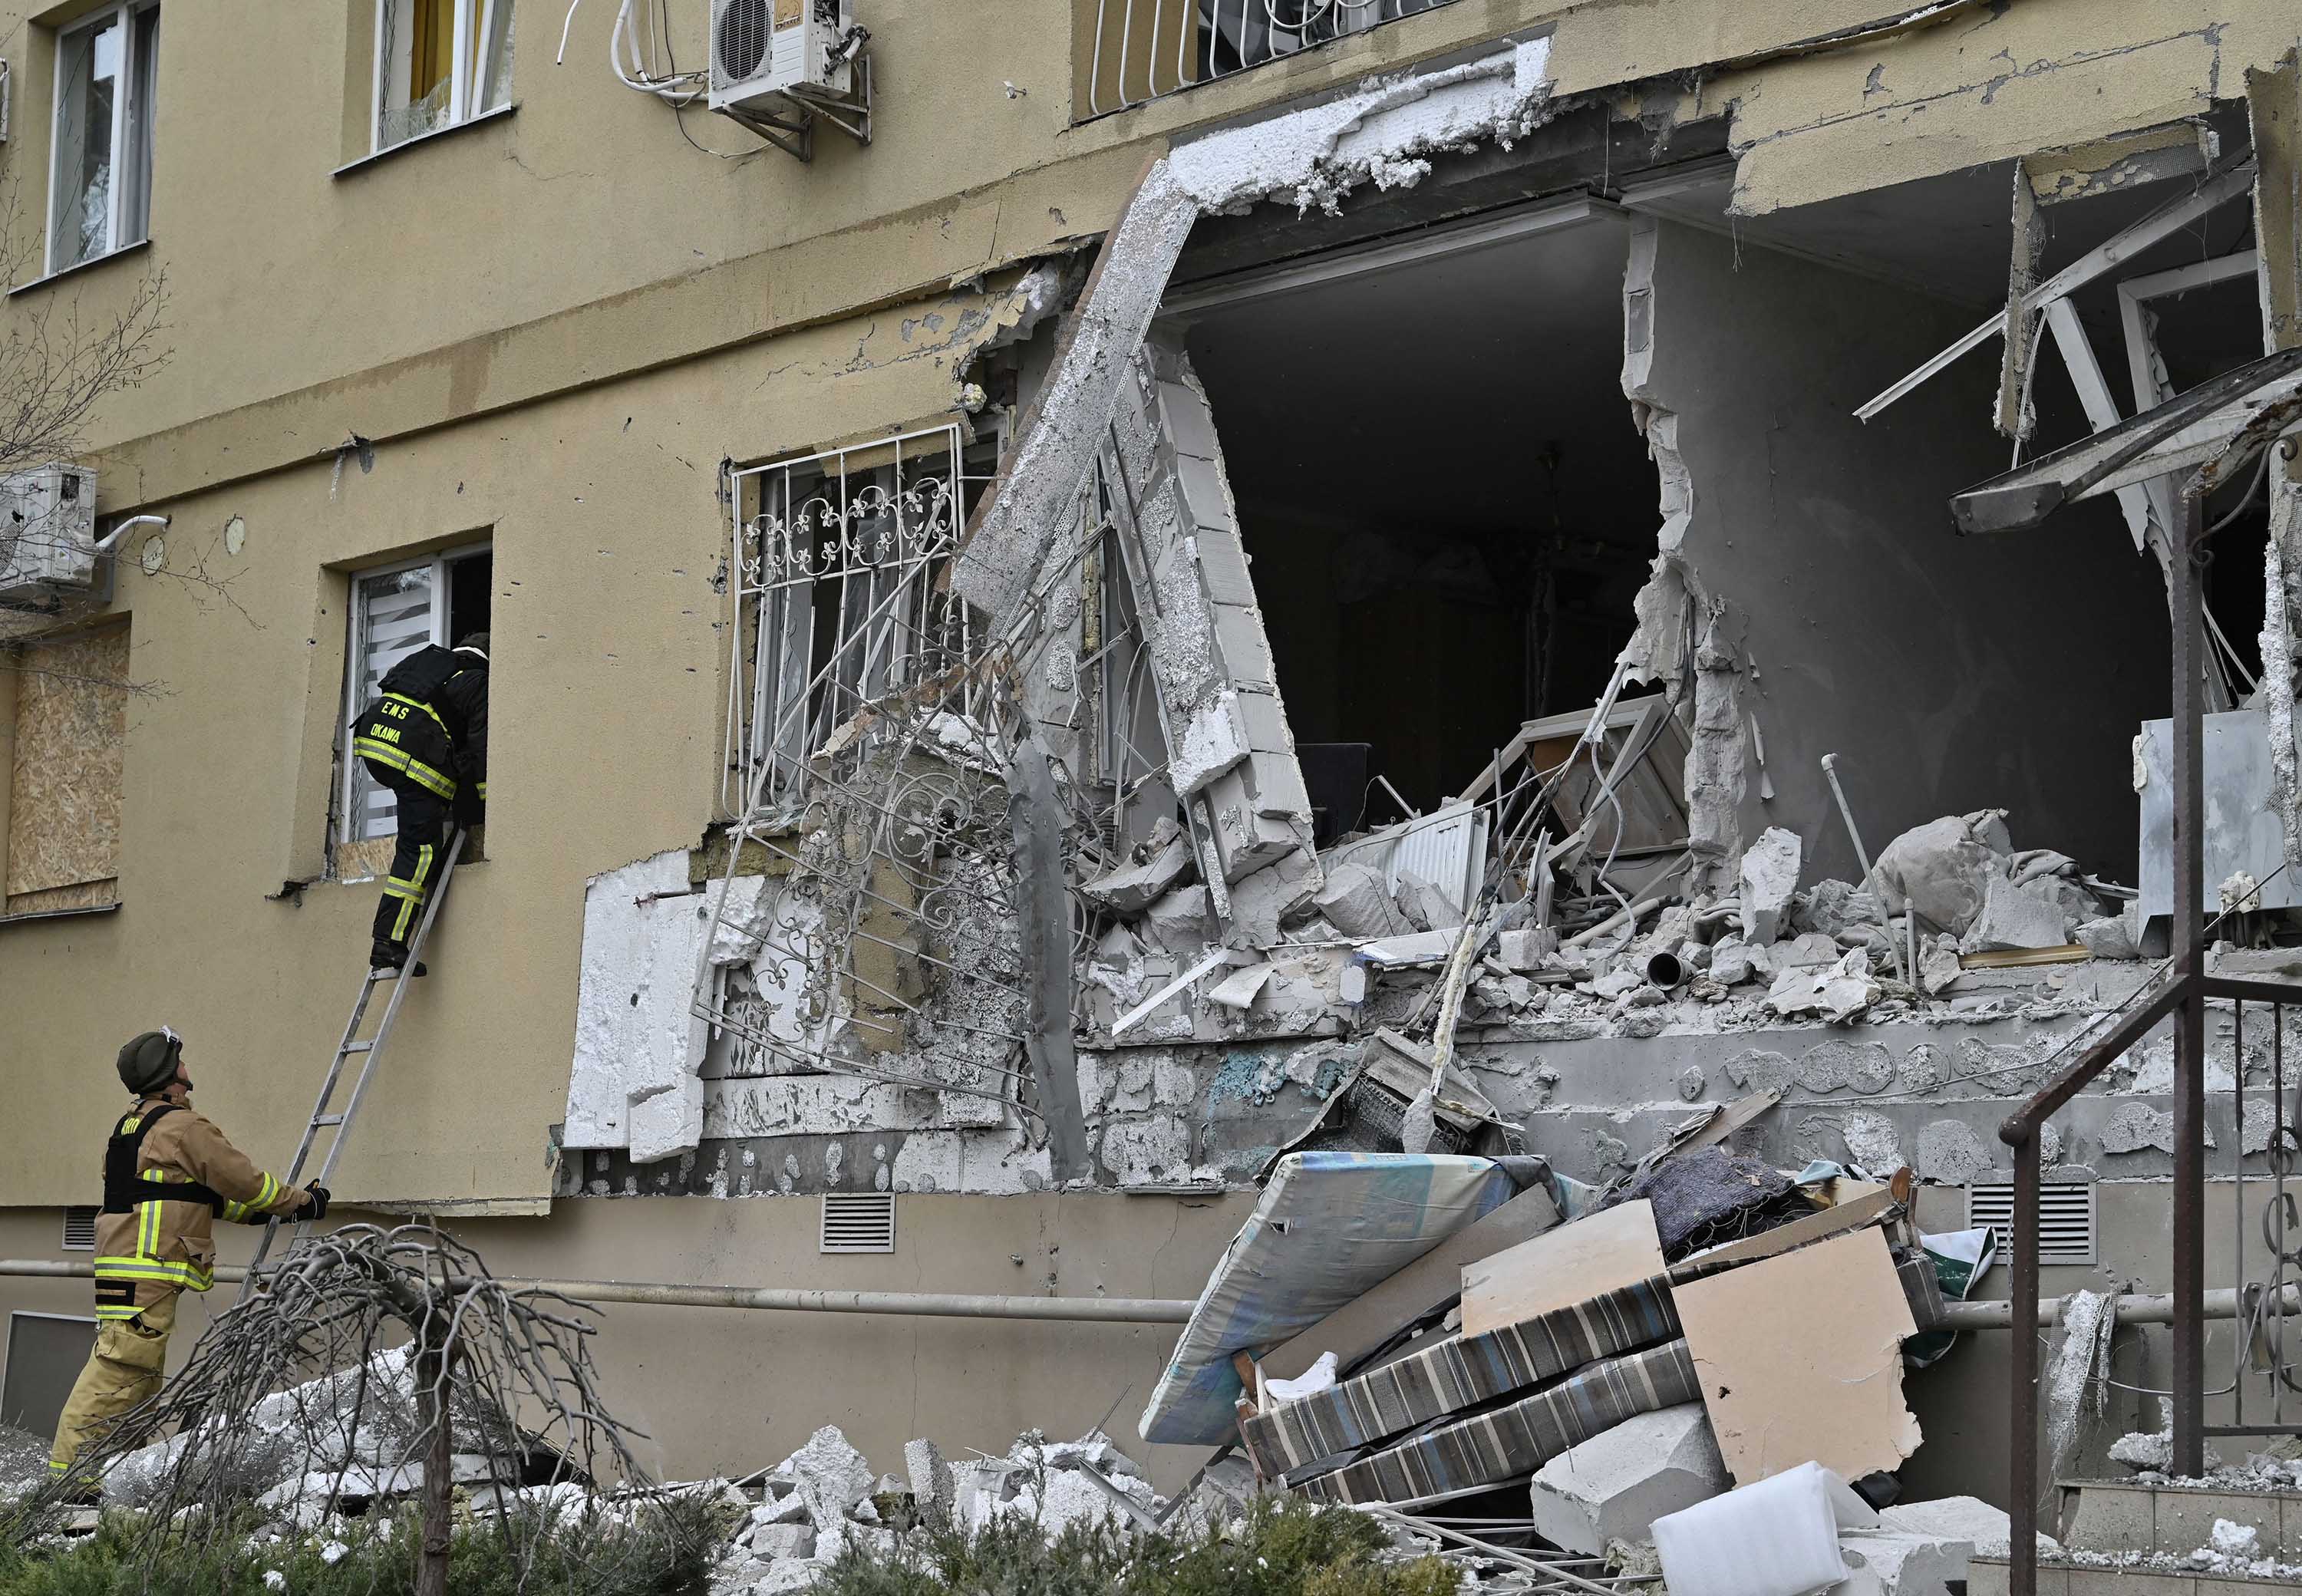 Emergency workers inspect a damaged residential building after Russian shelling in Kherson, southern Ukraine, on Jan. 29.